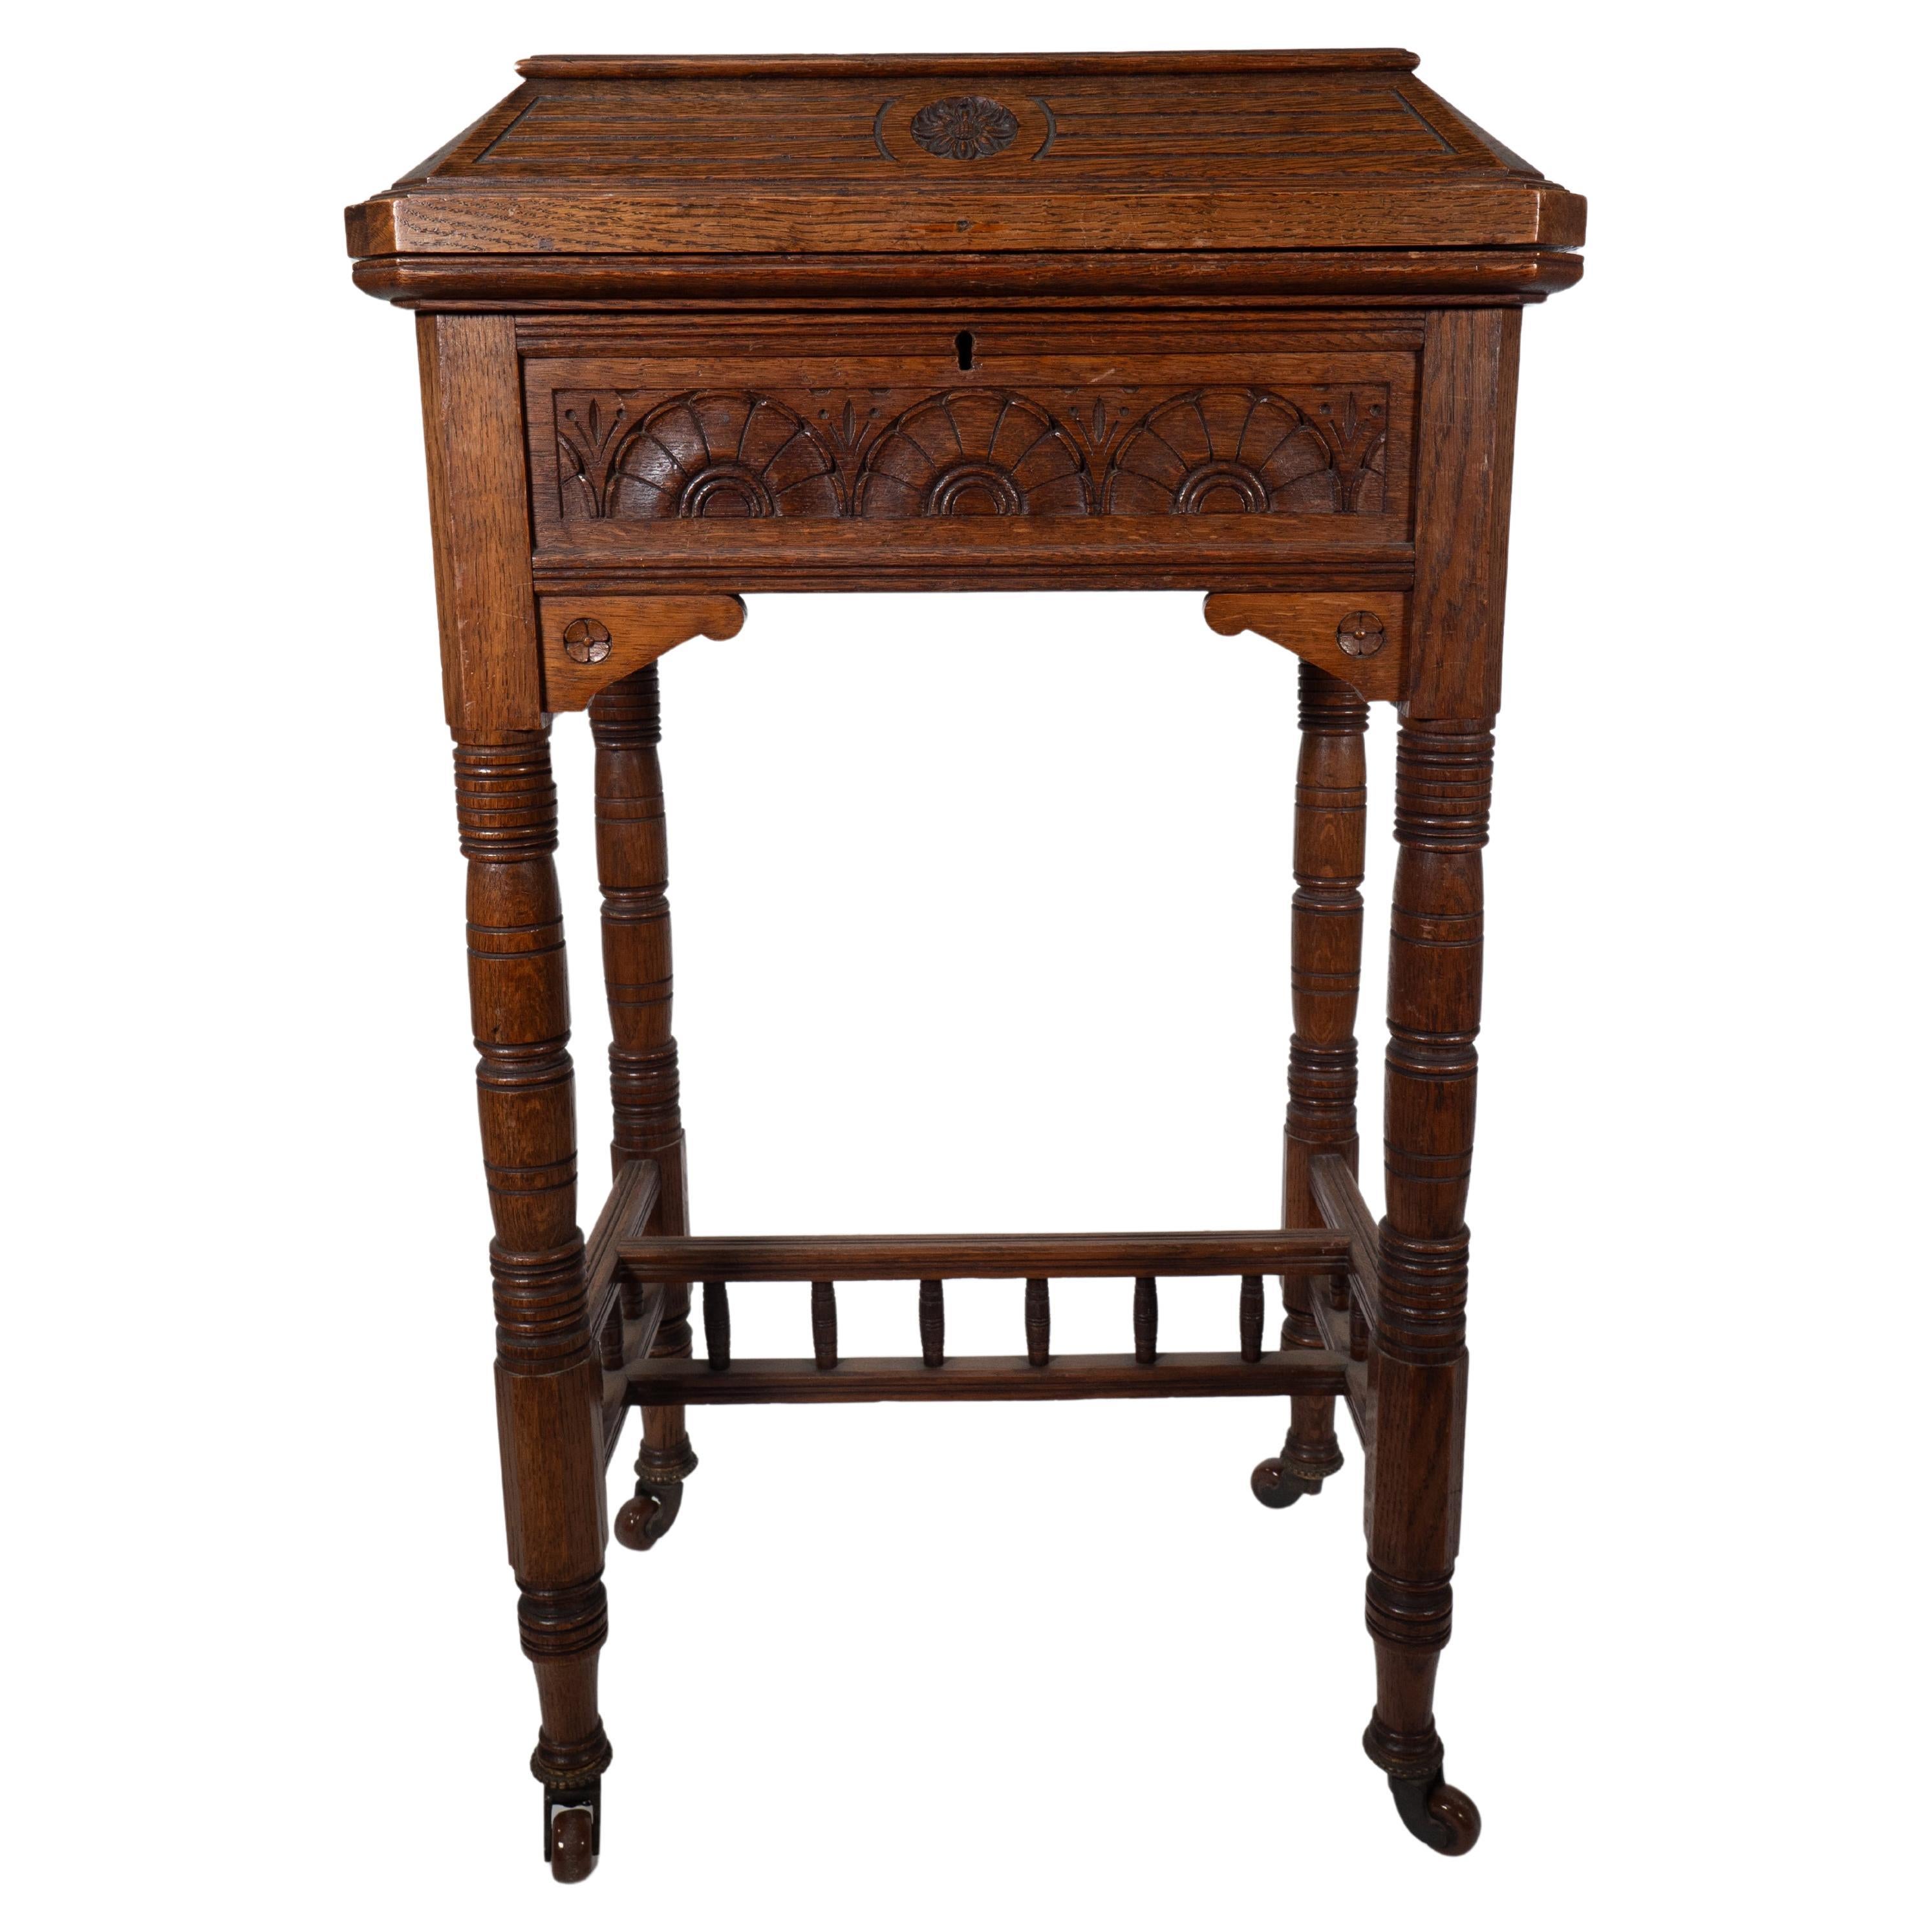 Bruce Talbert attributed. An Aesthetic Movement/Gothic Revival oak needlework table and box with carved lunettes, florets and incised turned details to the legs united with turnings to the stretchers.
